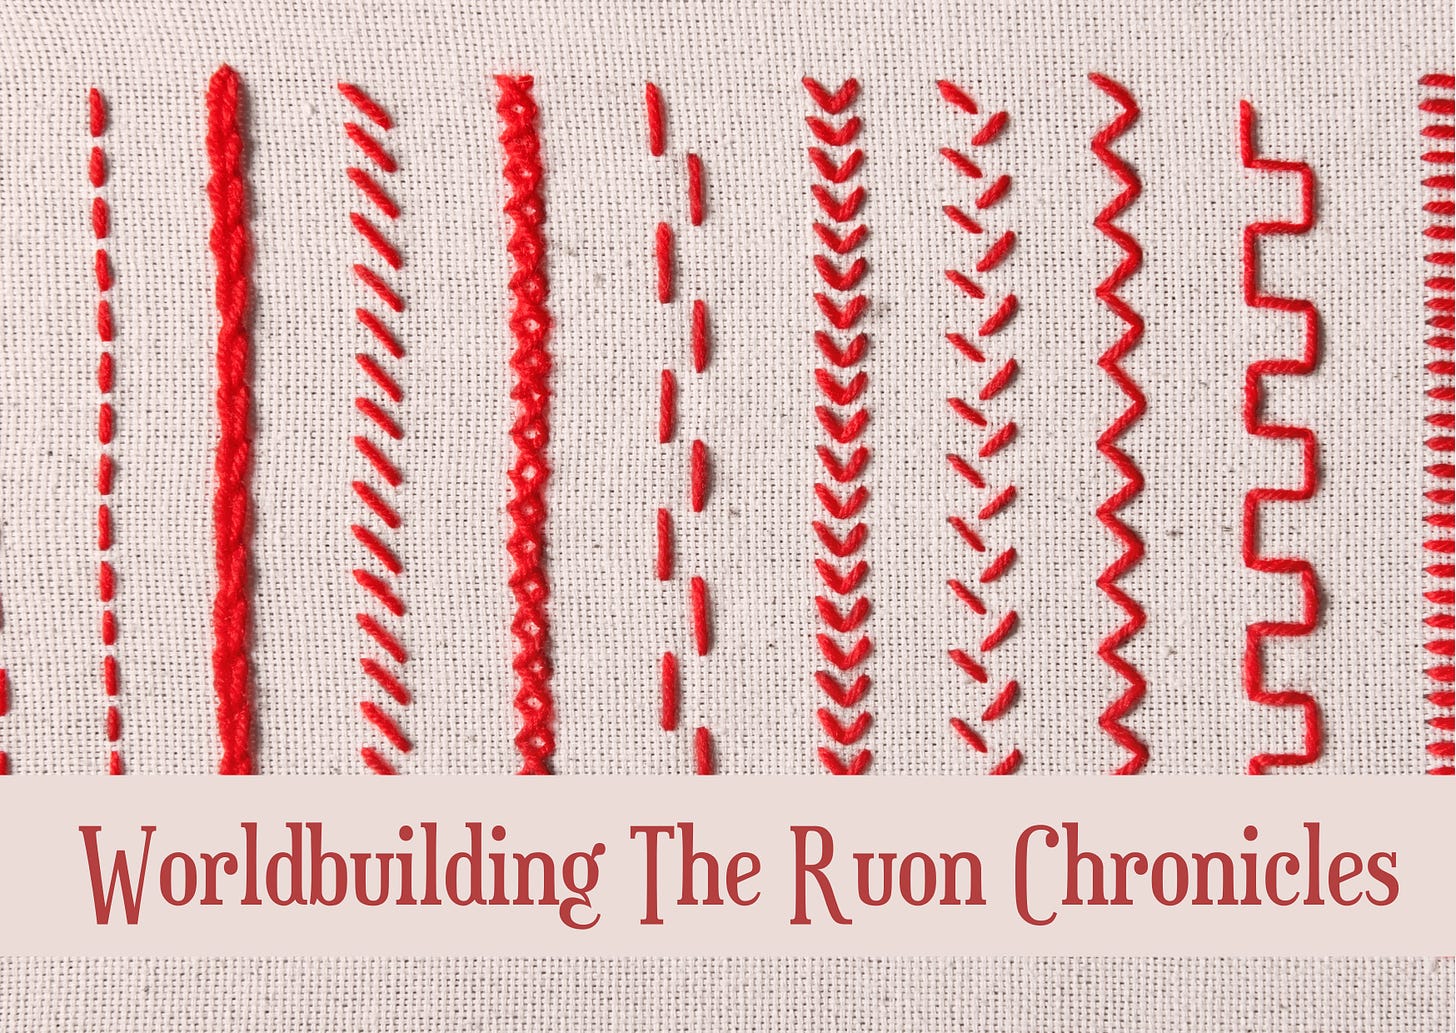 Header for newsletter showing a range of embroidered stitches